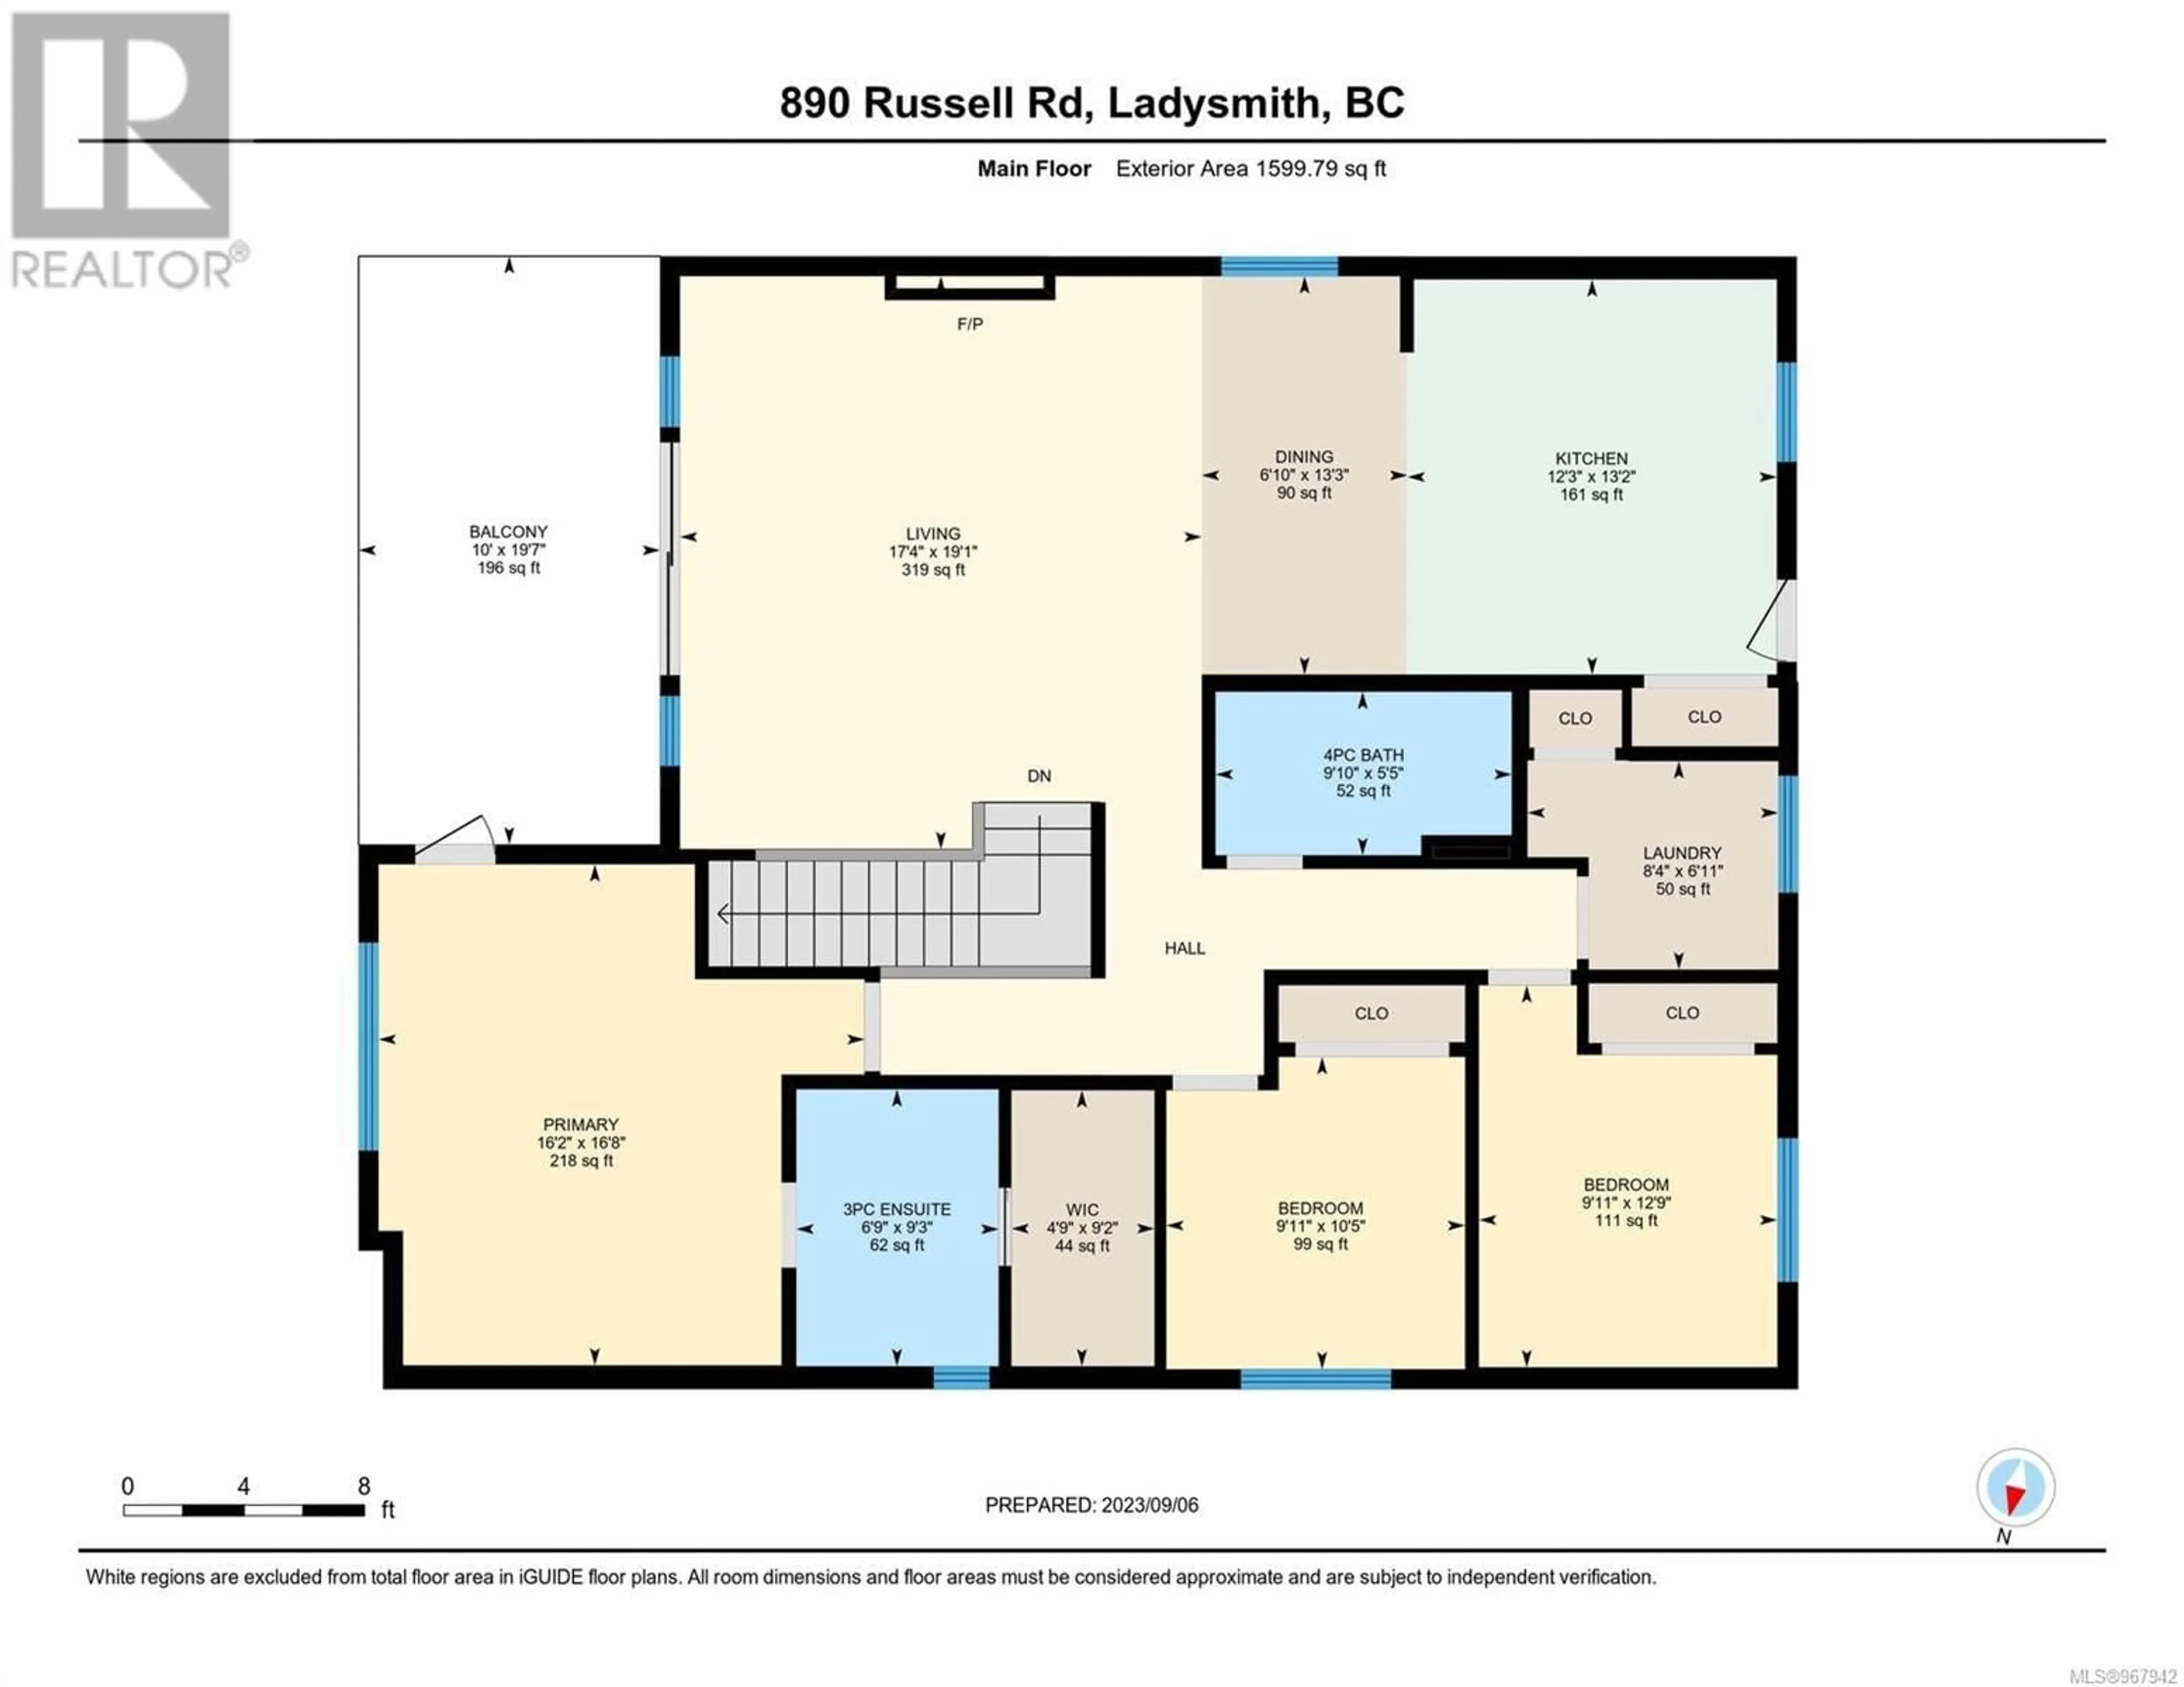 Floor plan for 890 Russell Rd, Ladysmith British Columbia V9G1W4